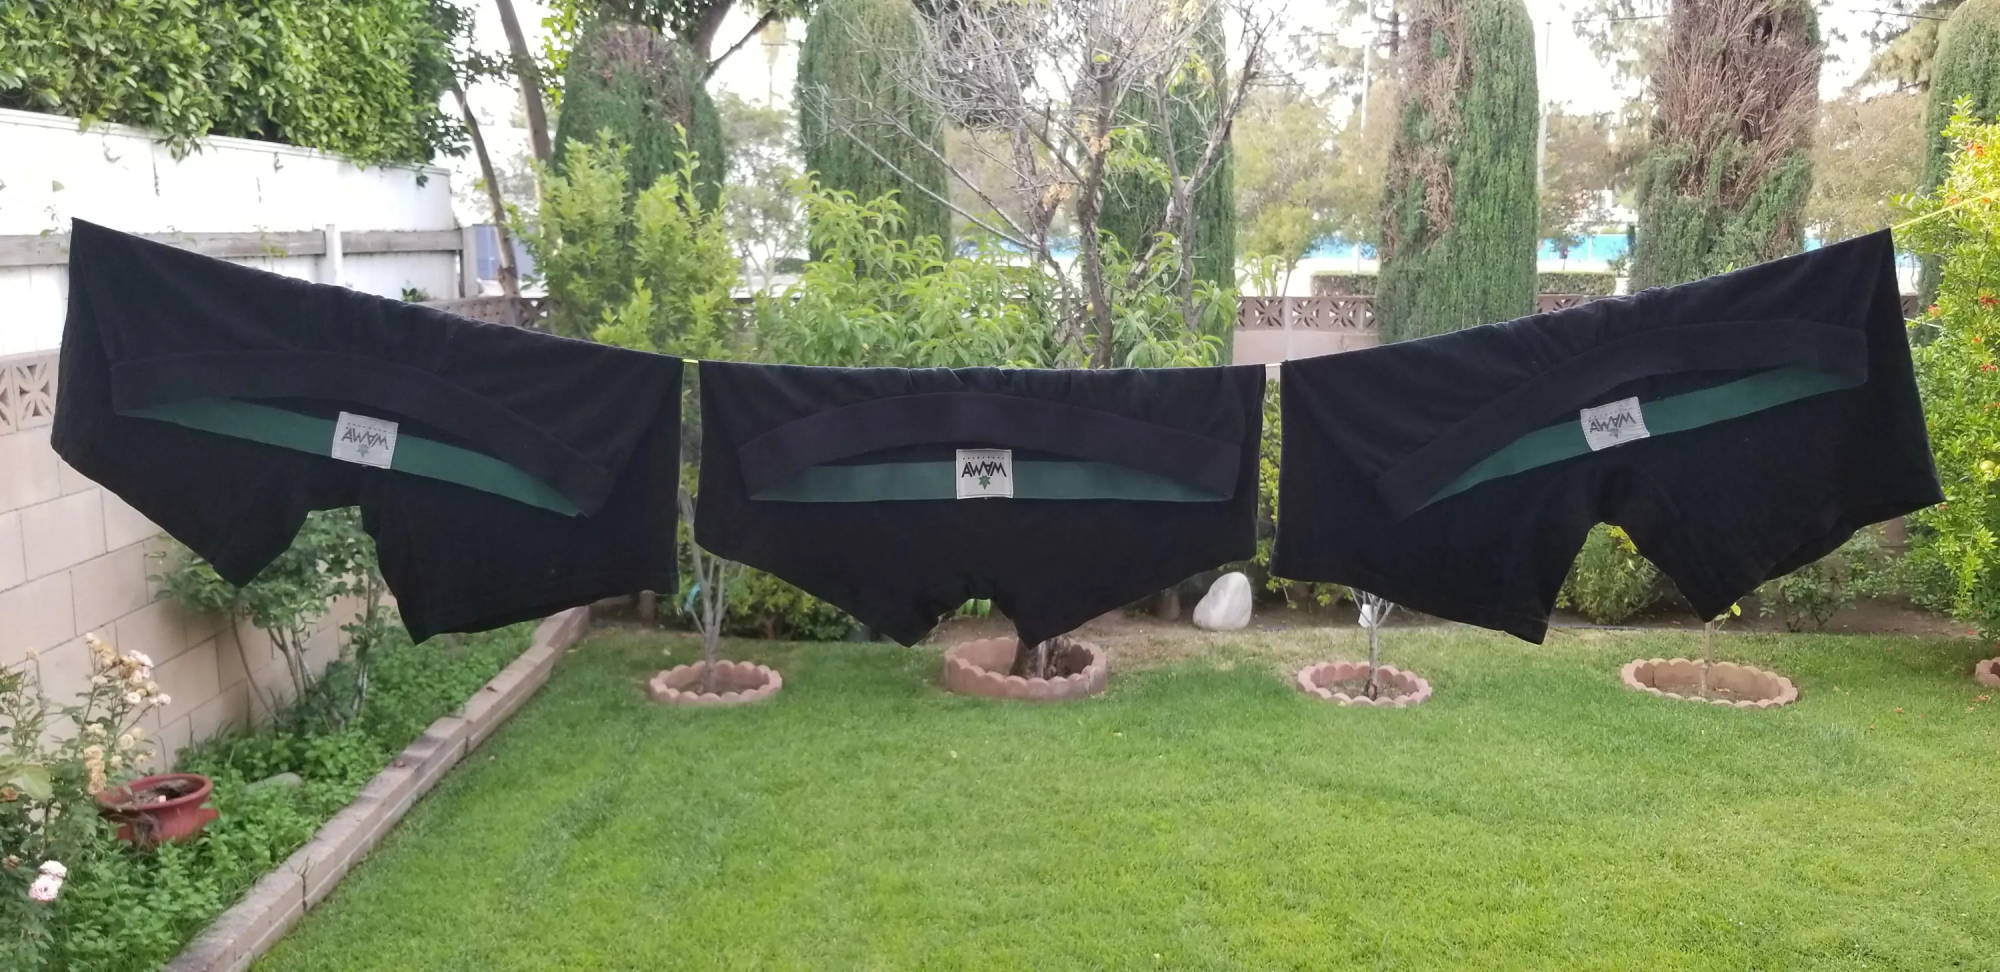 Should you wash underwear before wearing? Three pairs of WAMA boxers hang on a clothesline. 